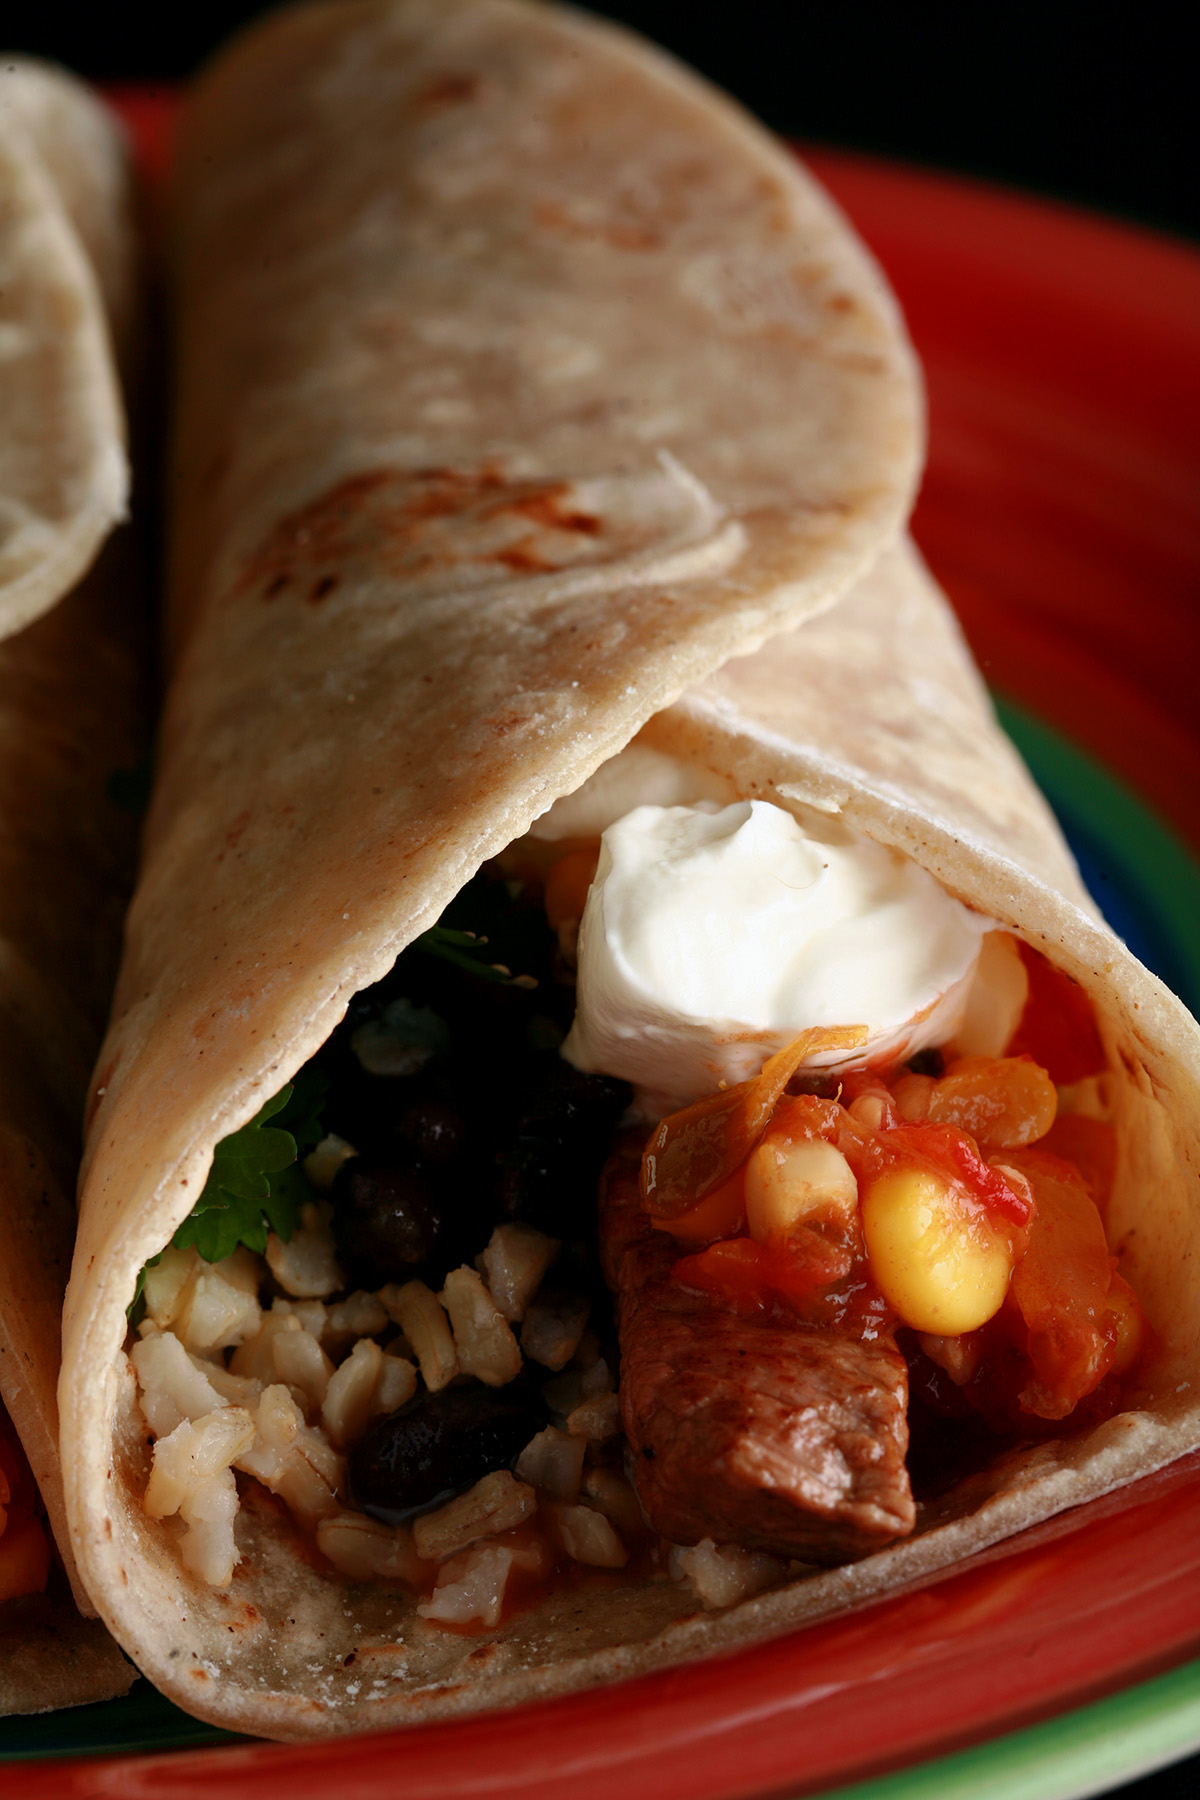 A close up view of a gluten free burrito on a red plate.